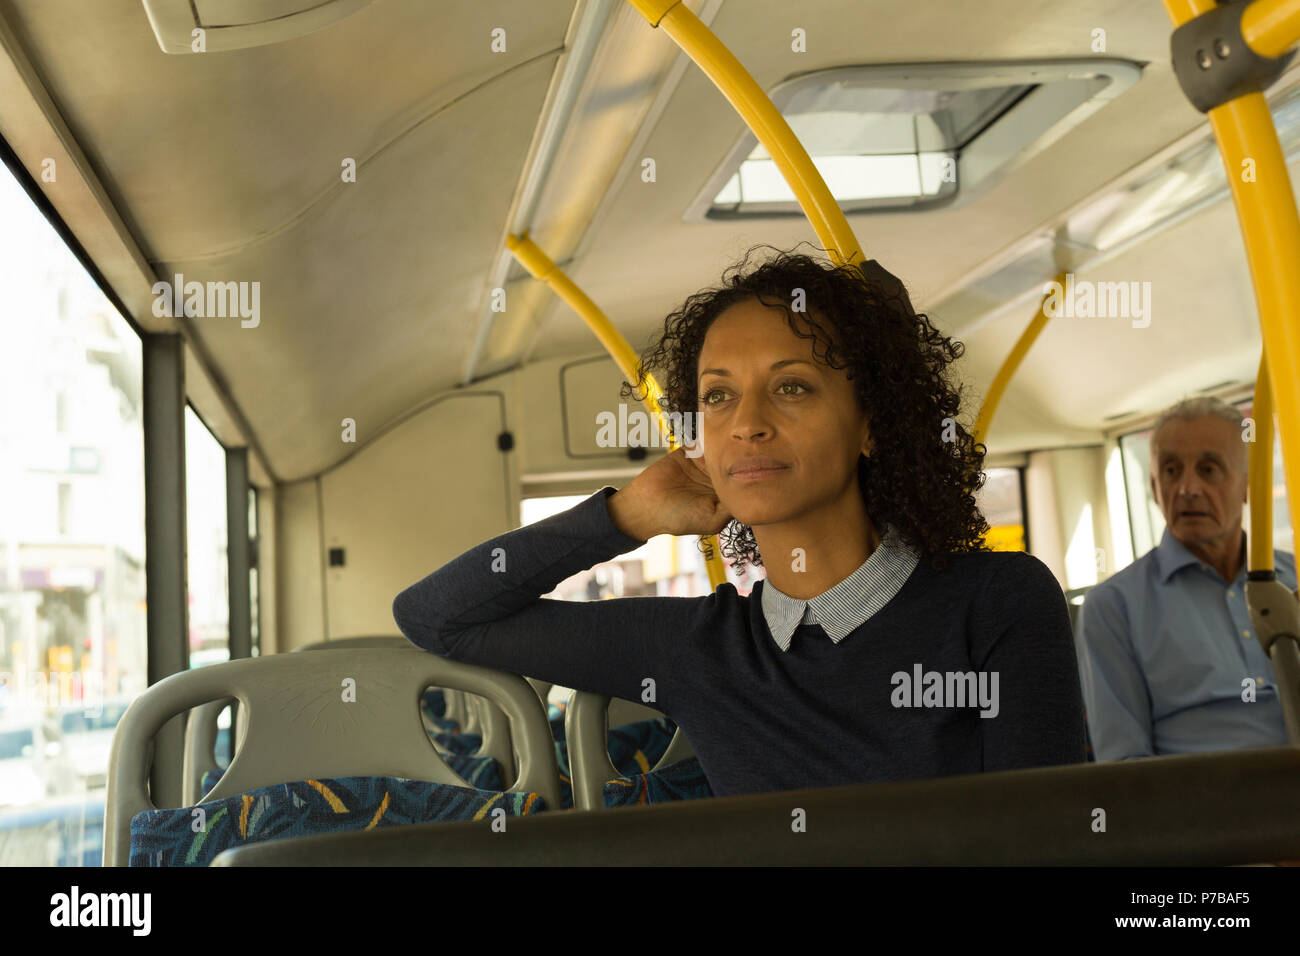 Woman travelling in the bus Stock Photo